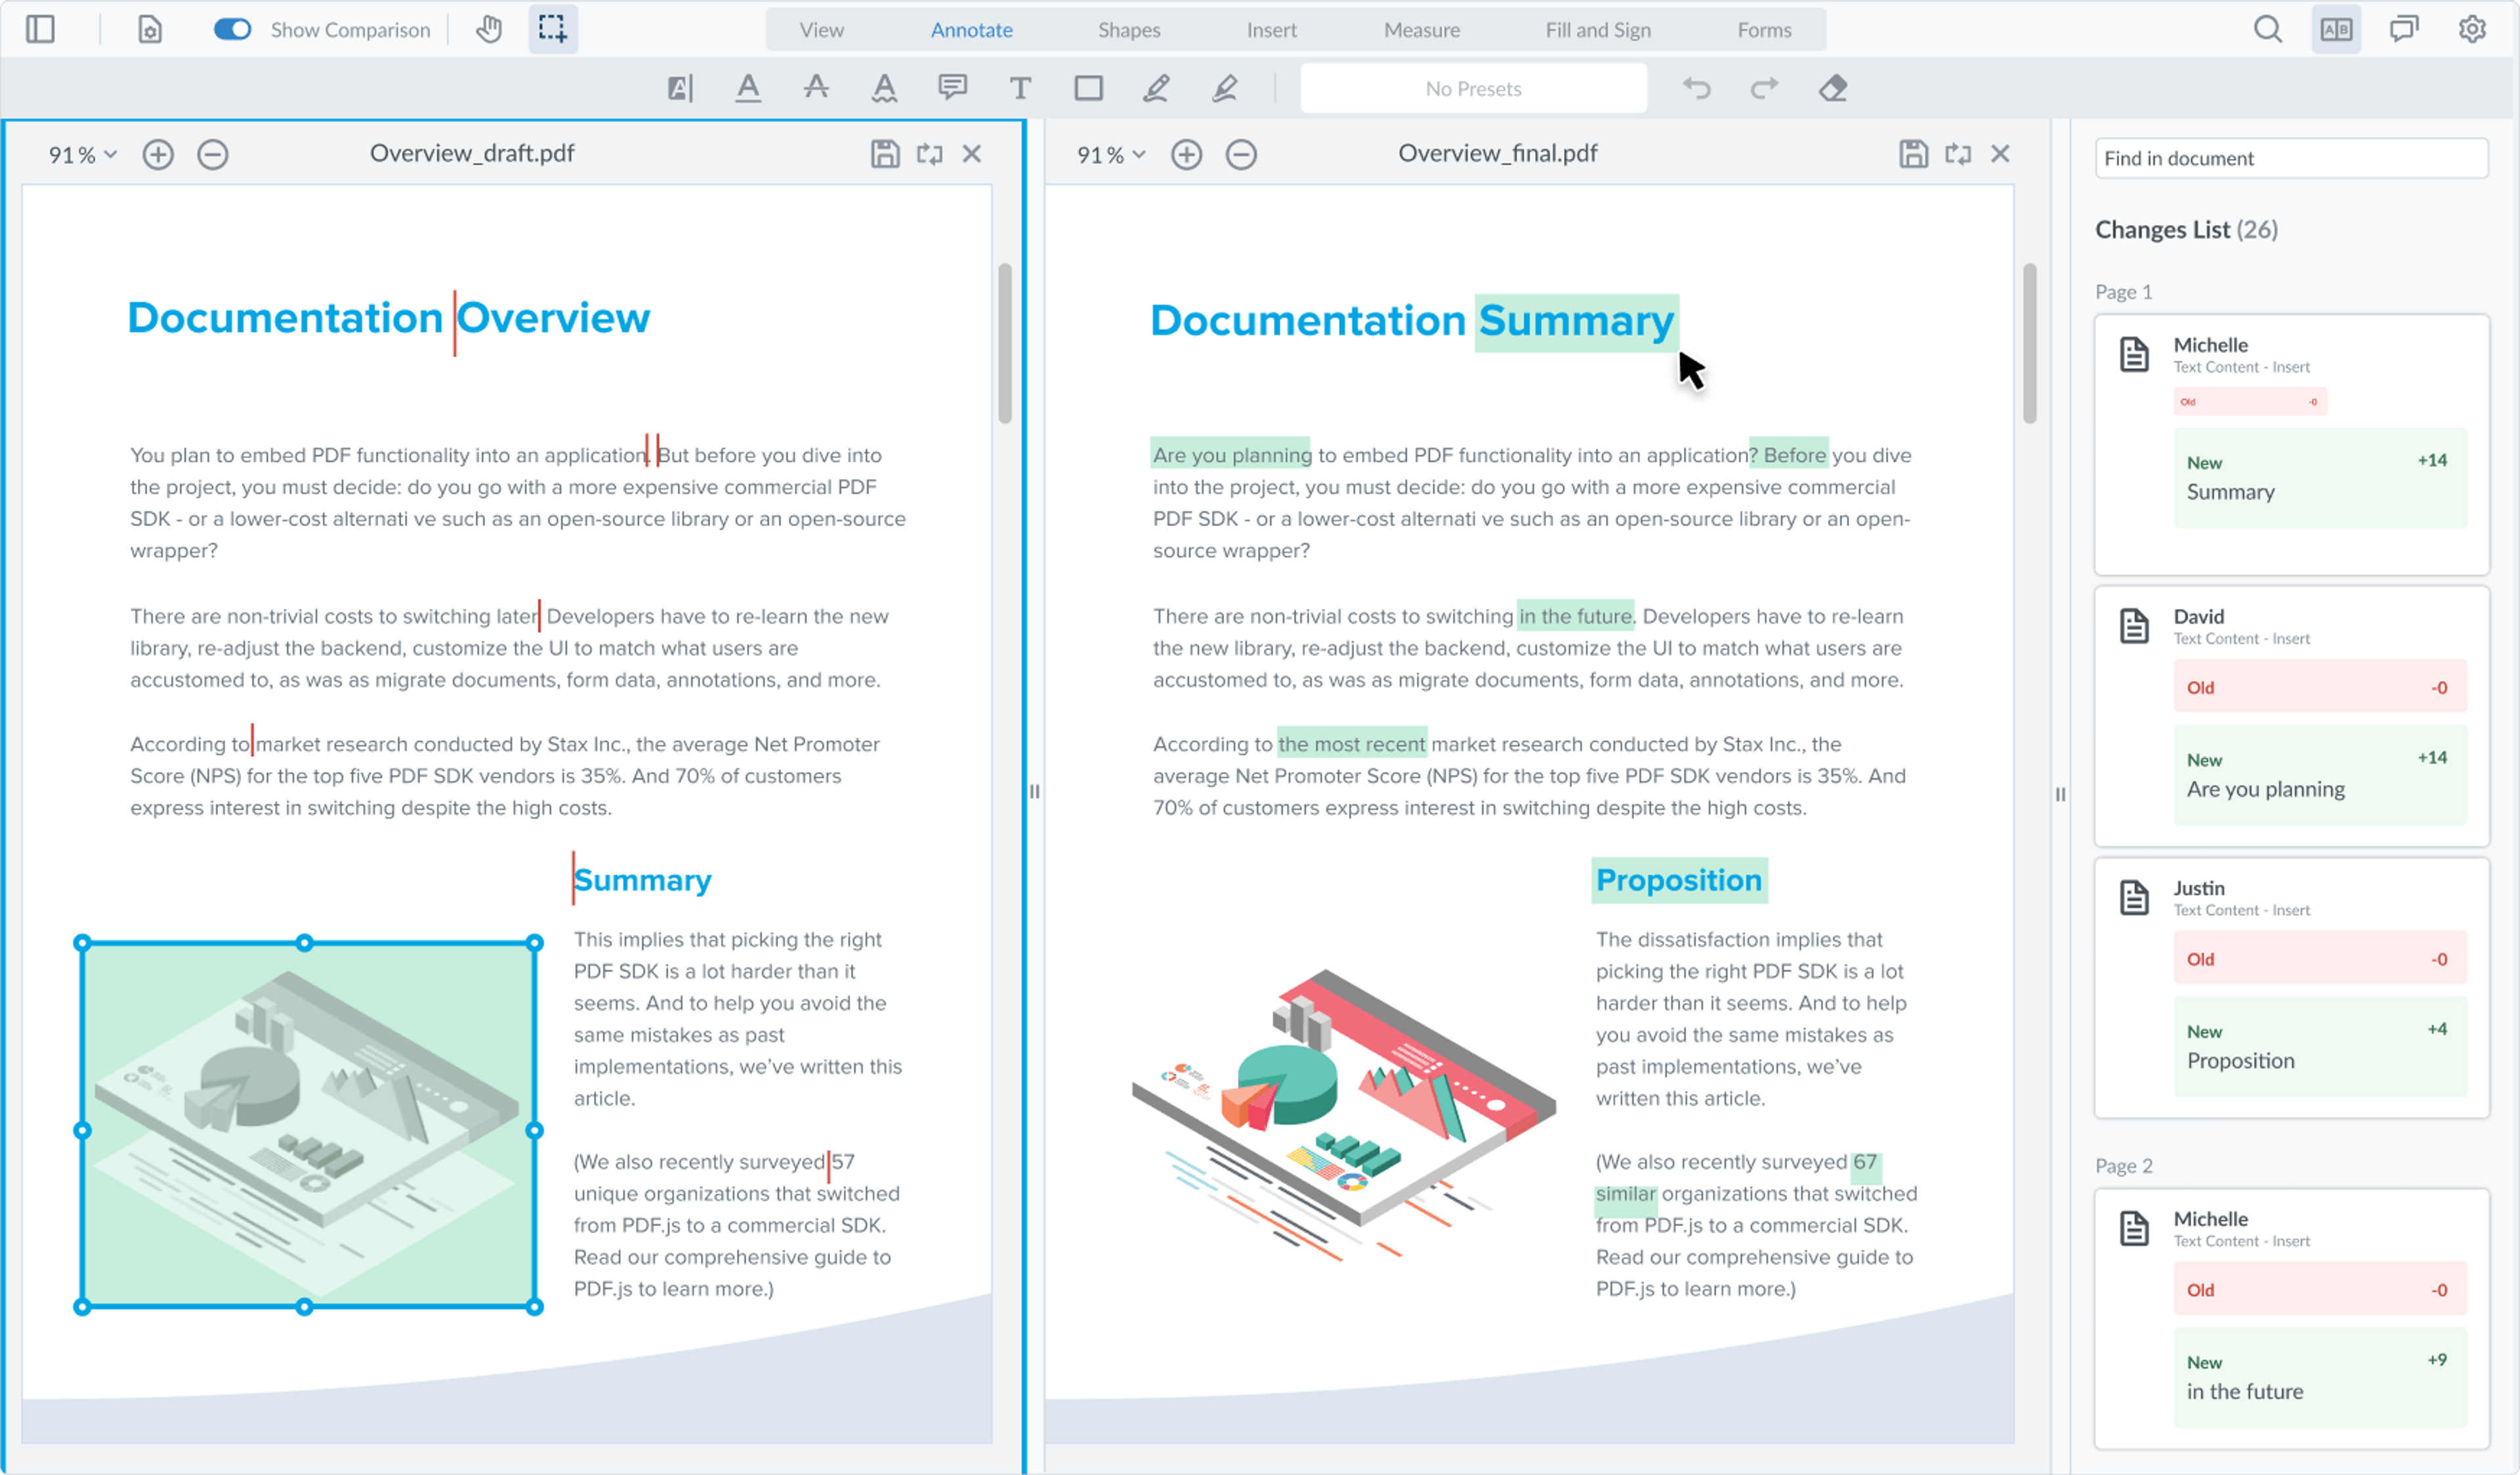 Comparing documents side by side